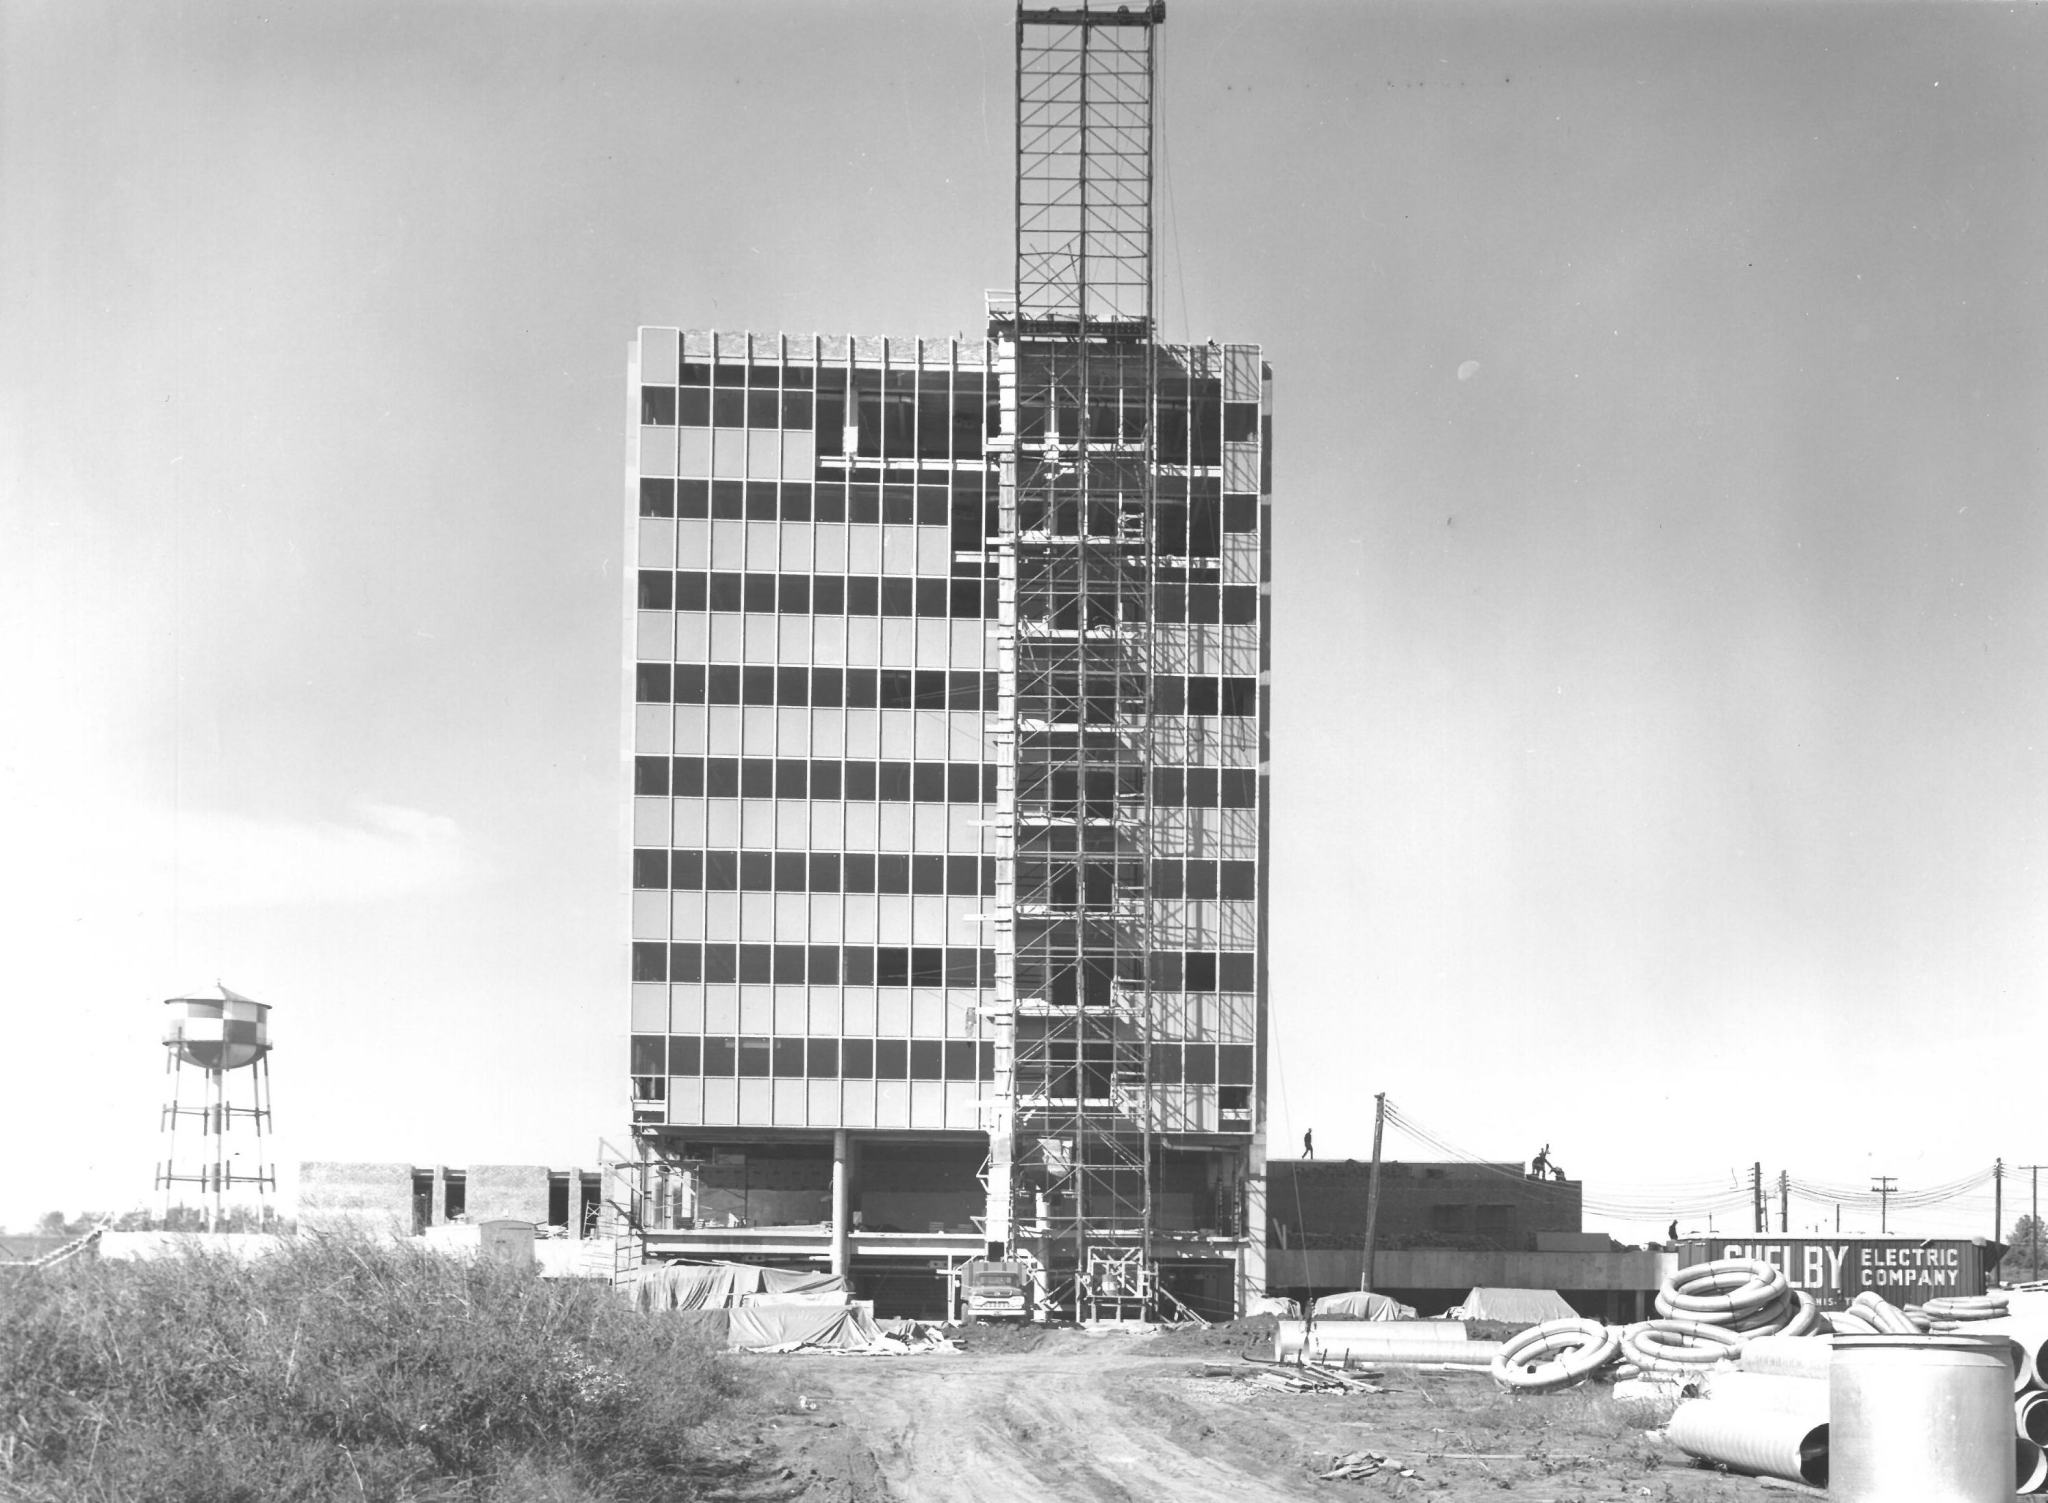 Construction in 1963 of Building 4200 at Marshall Space Flight Center